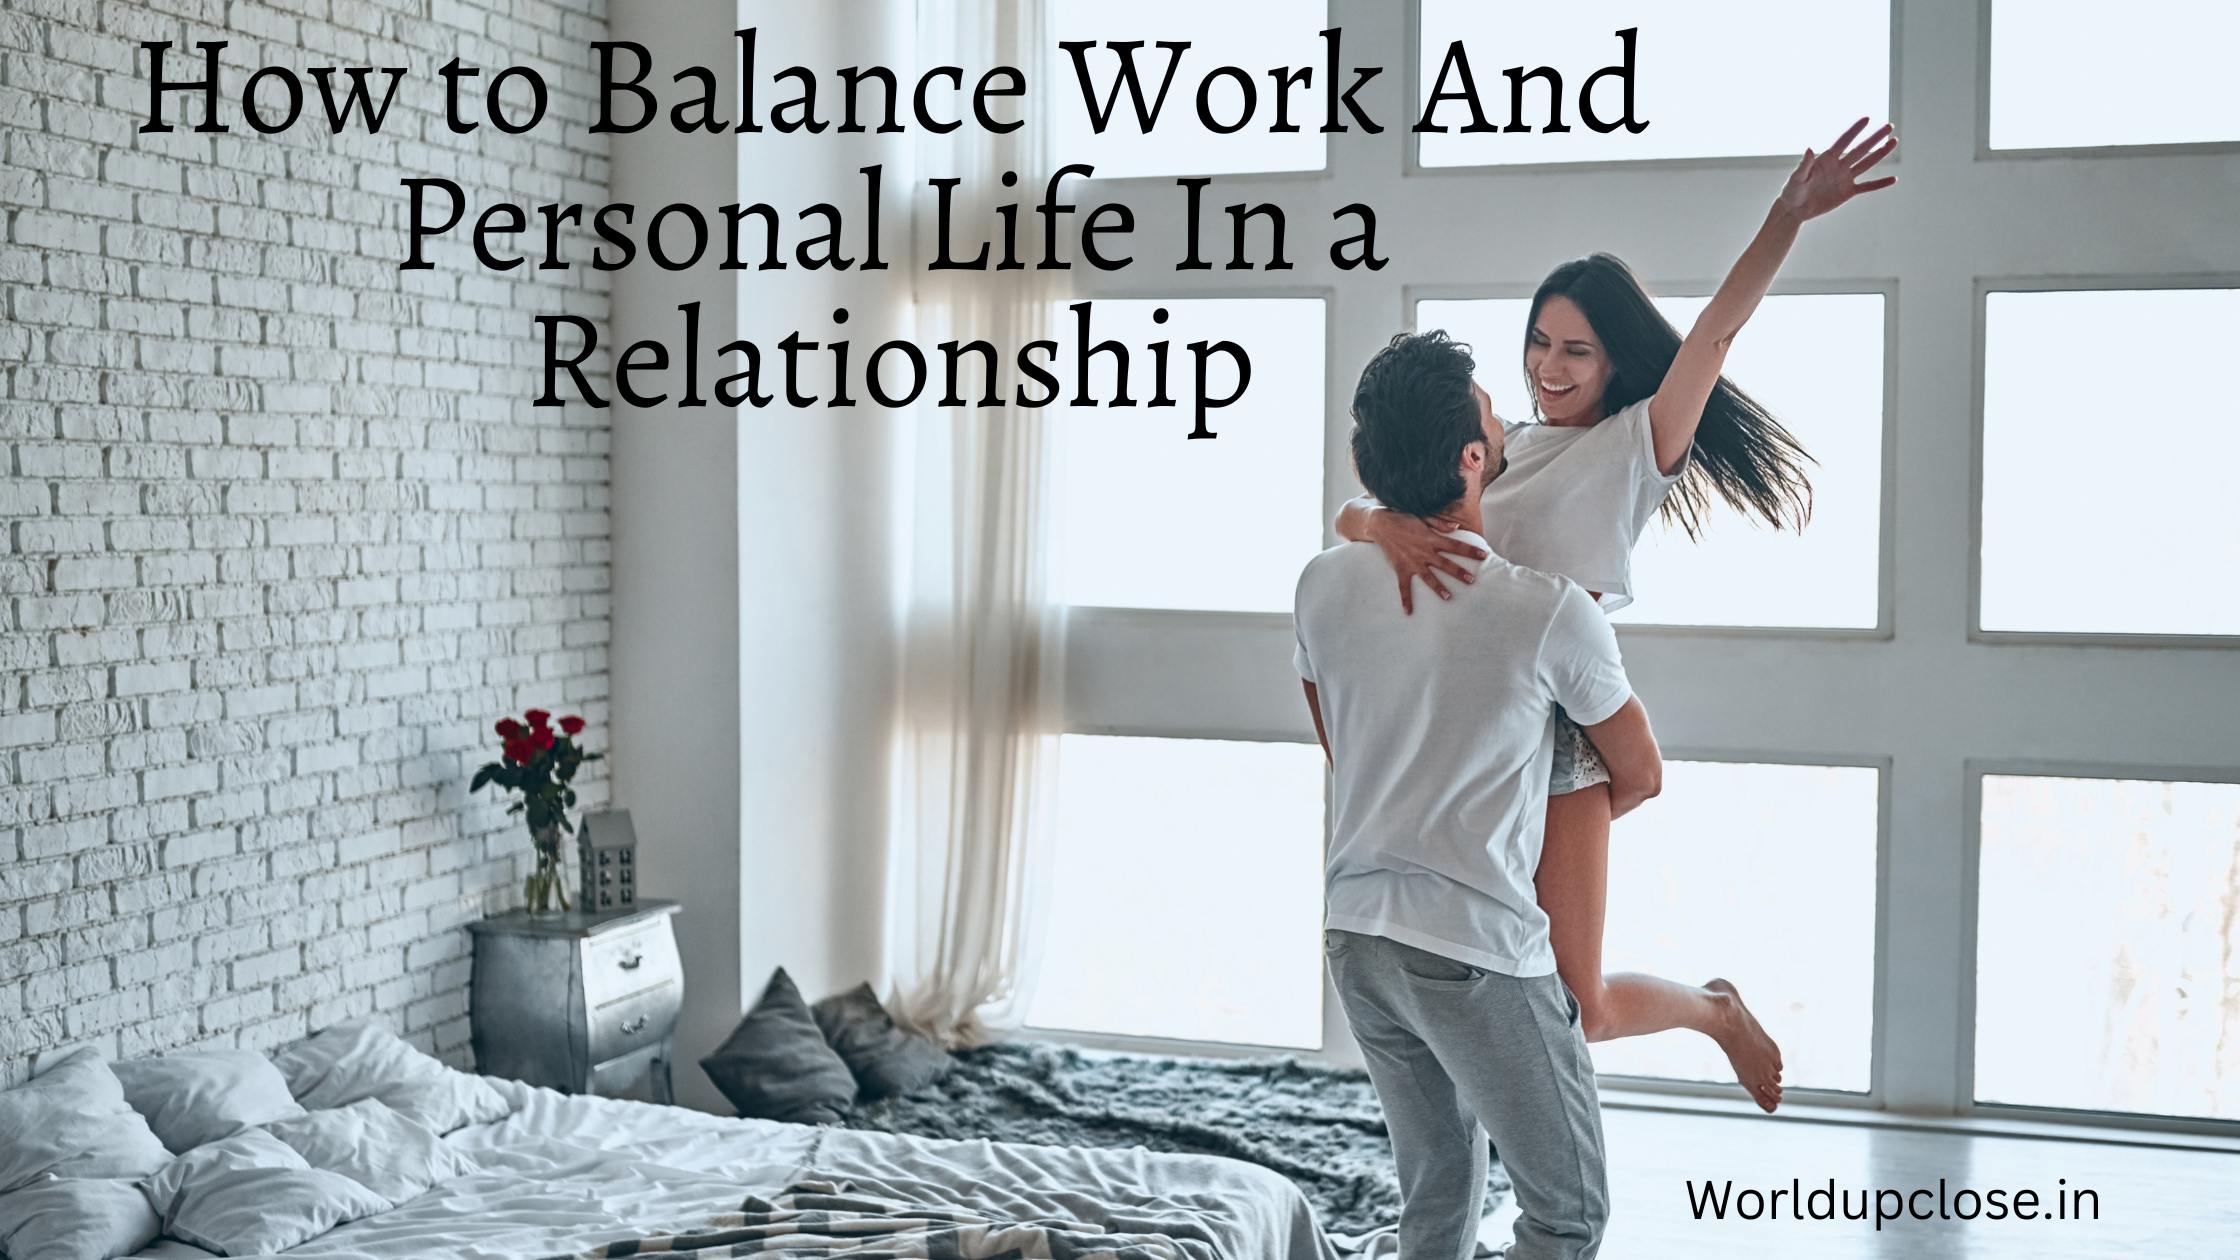 11 Ways to Balance Work and Personal Life in a Relationship 21